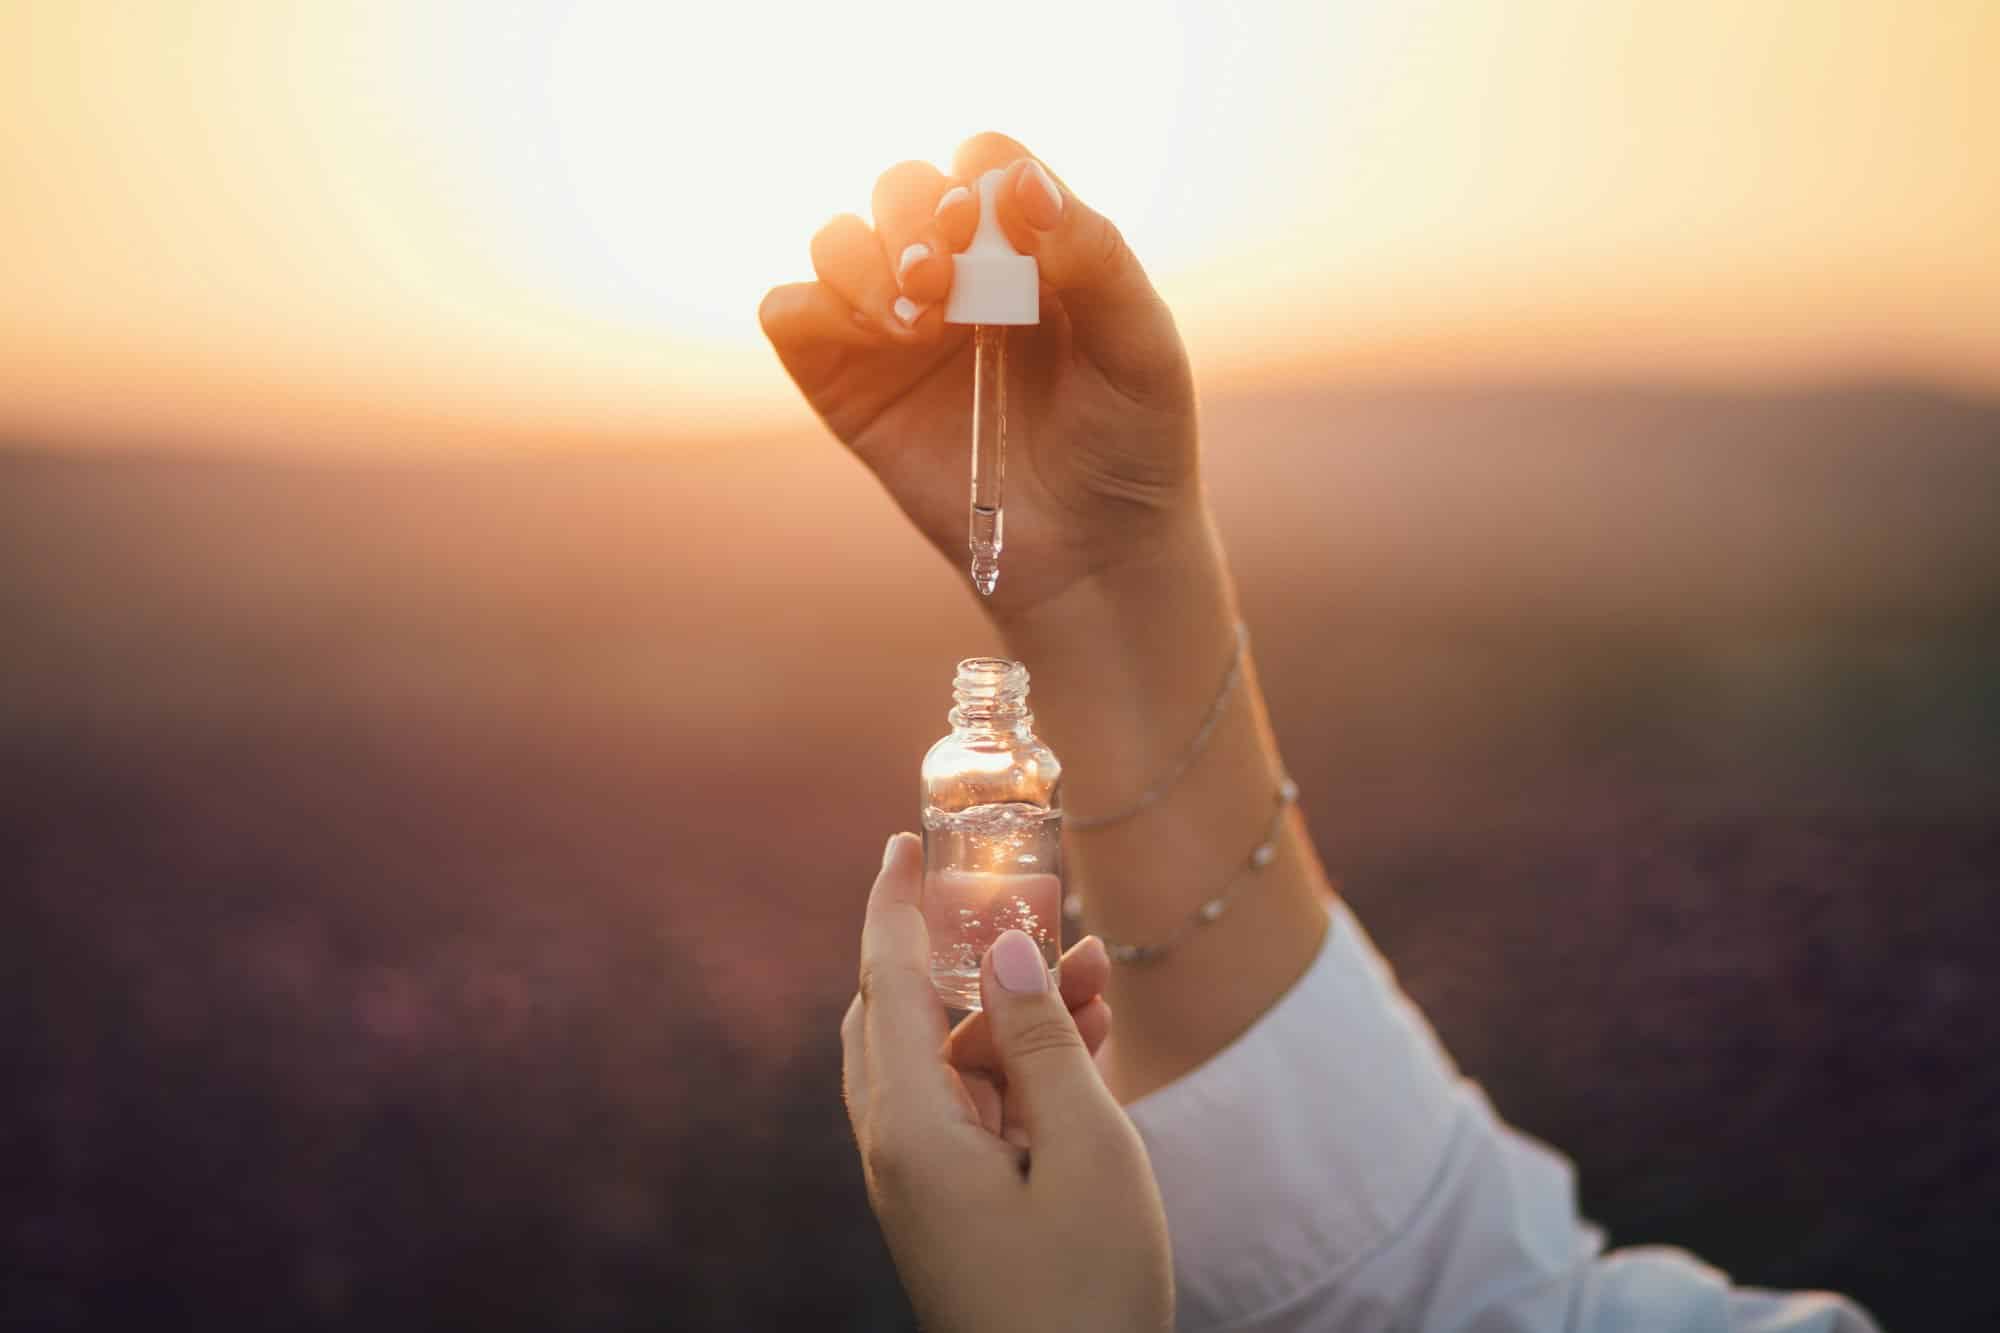 Close up female hands holding essential oil in a bottle with pipette in lavender field at sunset.